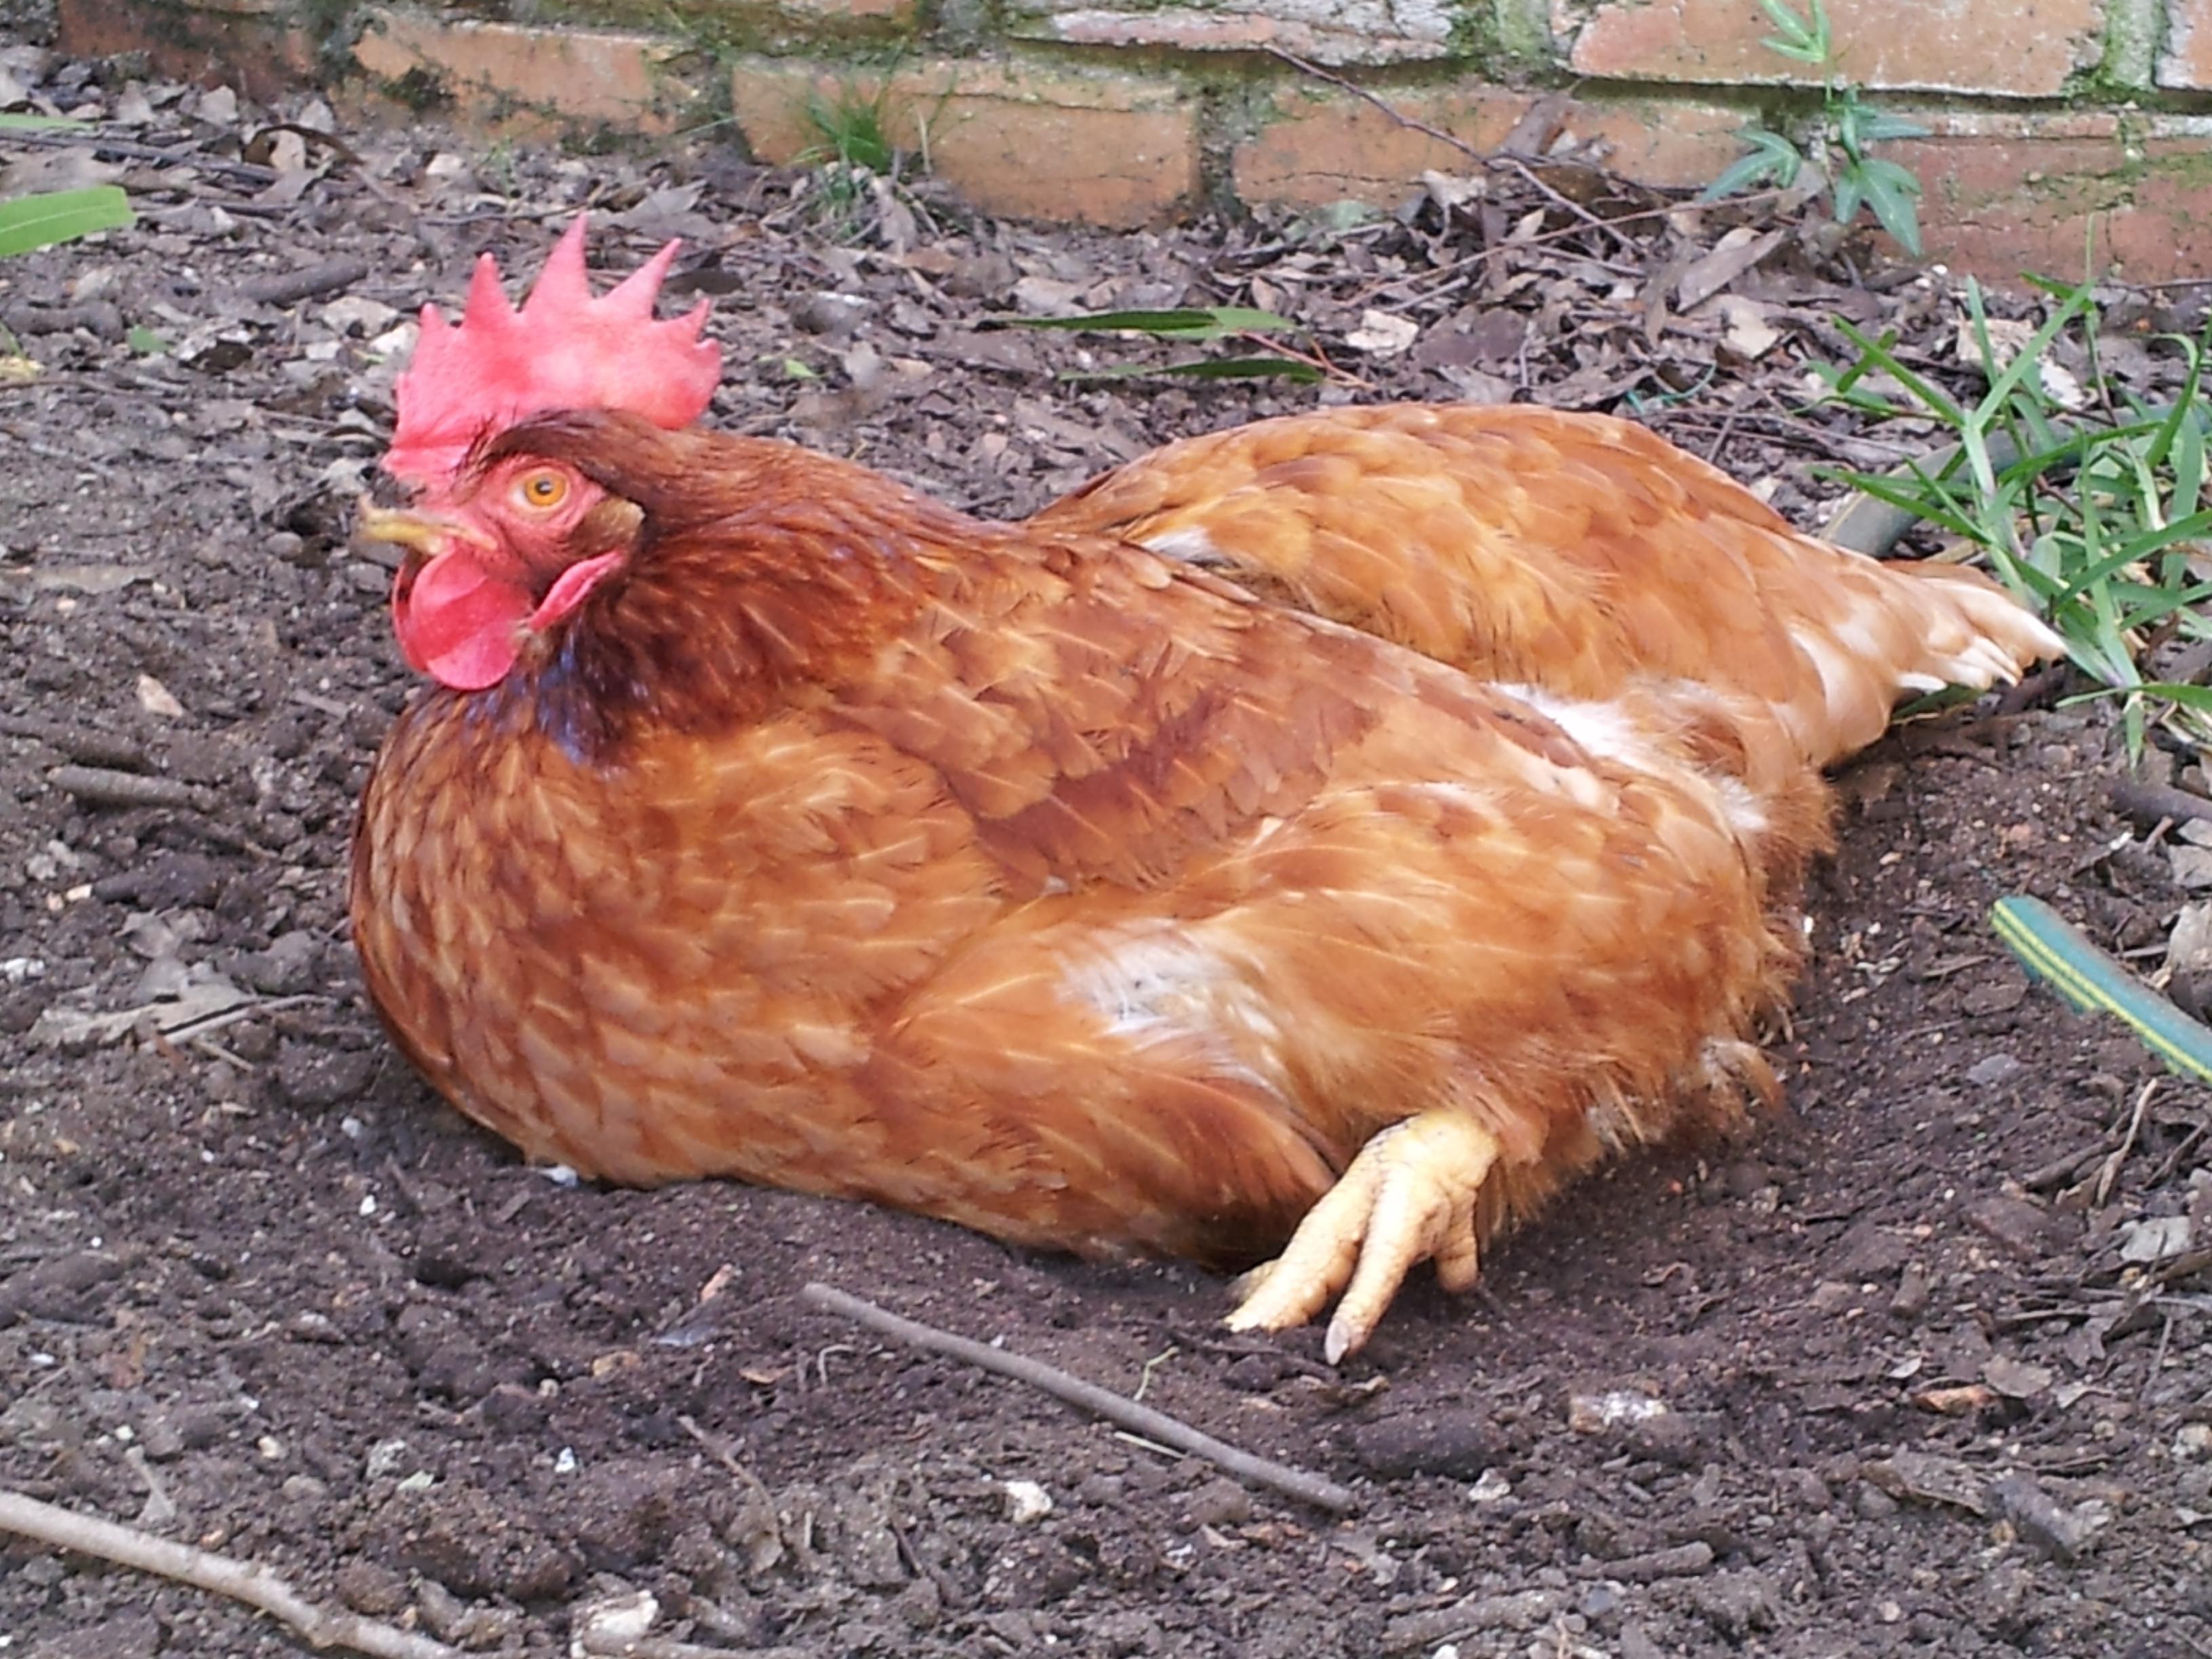 She was a sweet hen who never bothered anyone and loved to trail around aft...